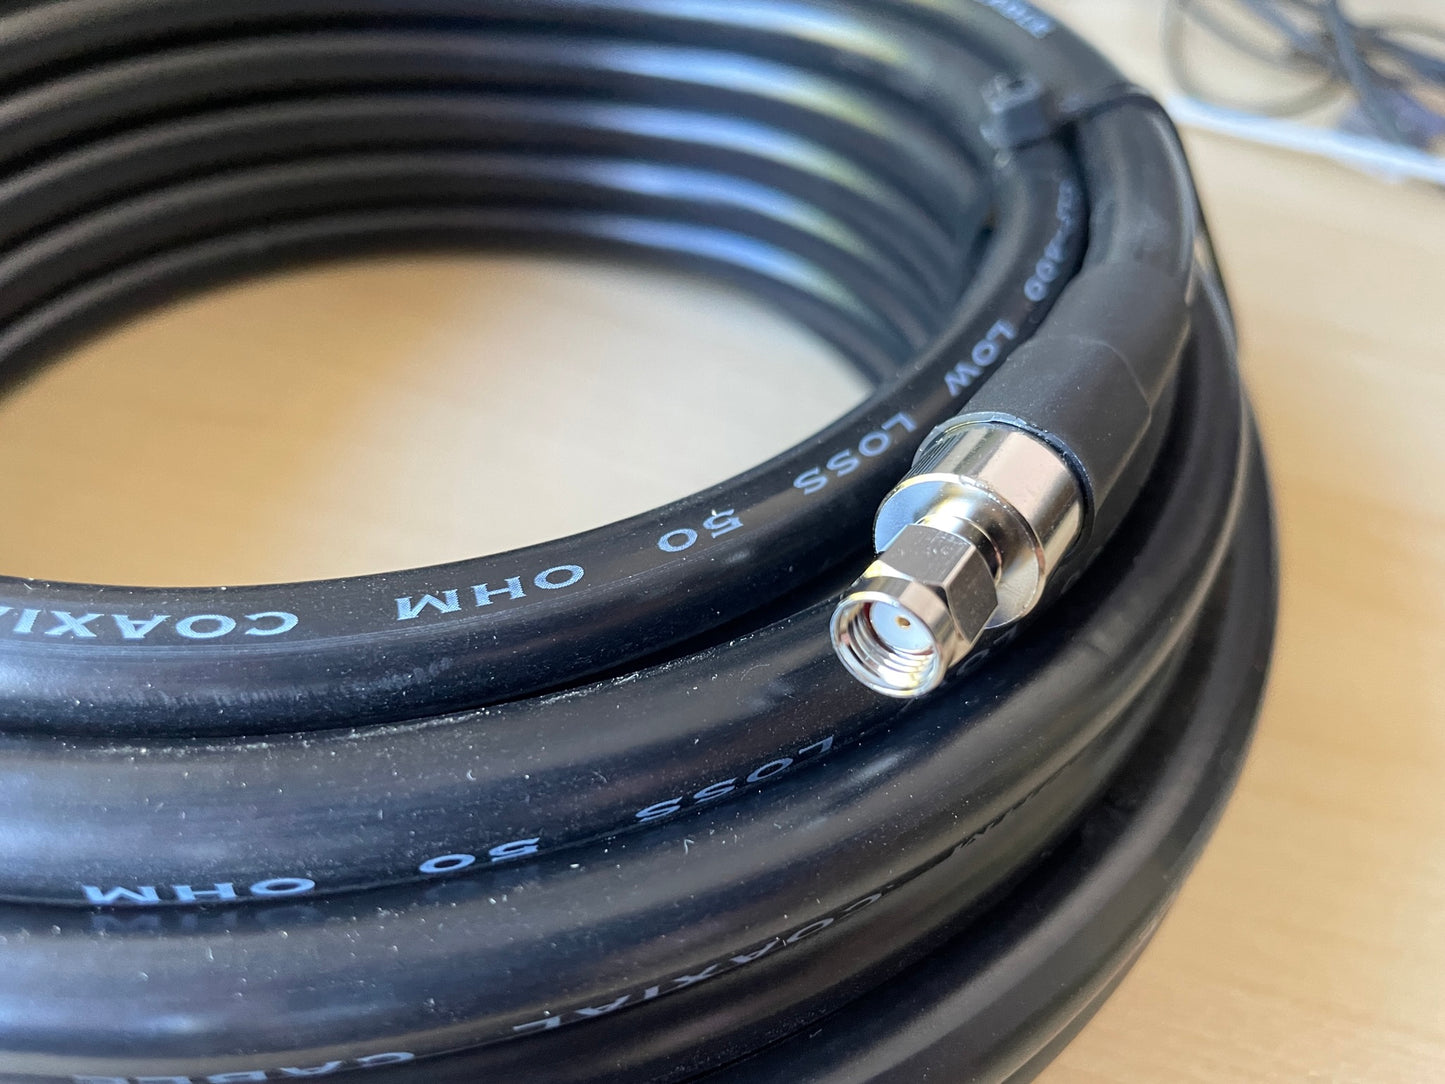 RFShop RP SMA(M) to N(F) BH, CLF400 (LMR400 equivalent) 10m Coaxial Cable